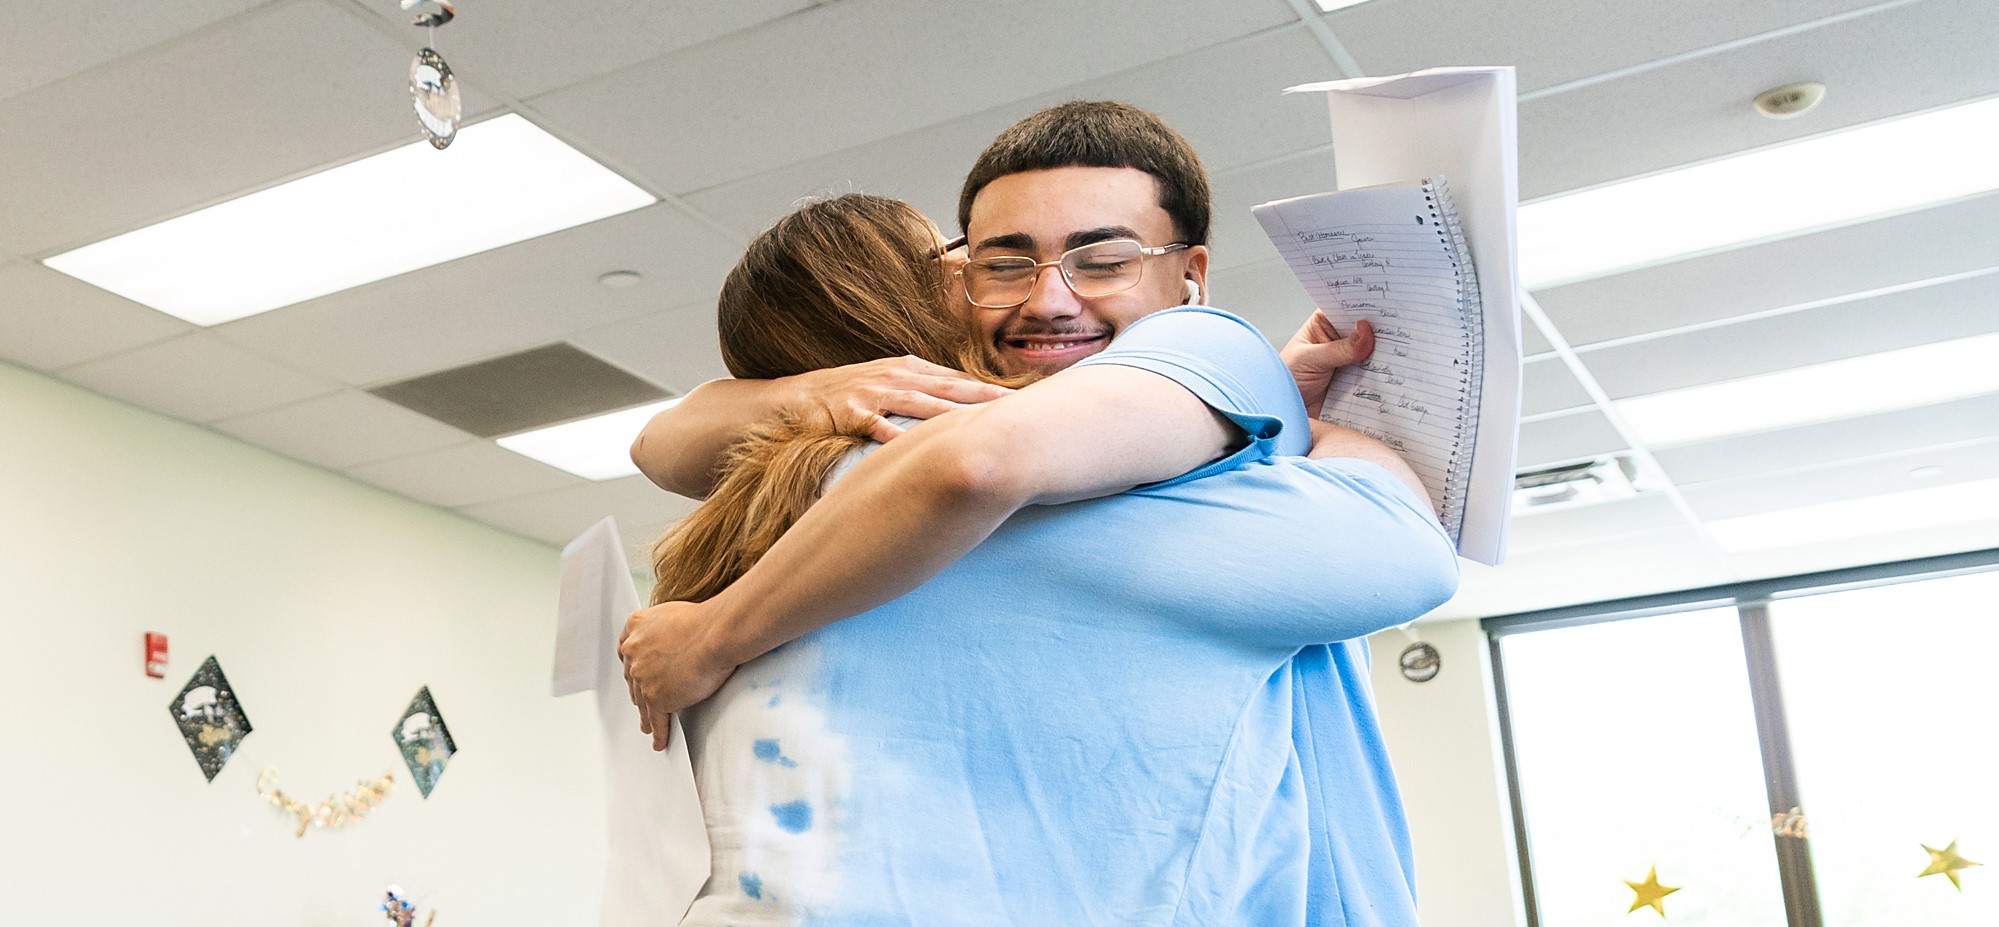 woman and male student hugging